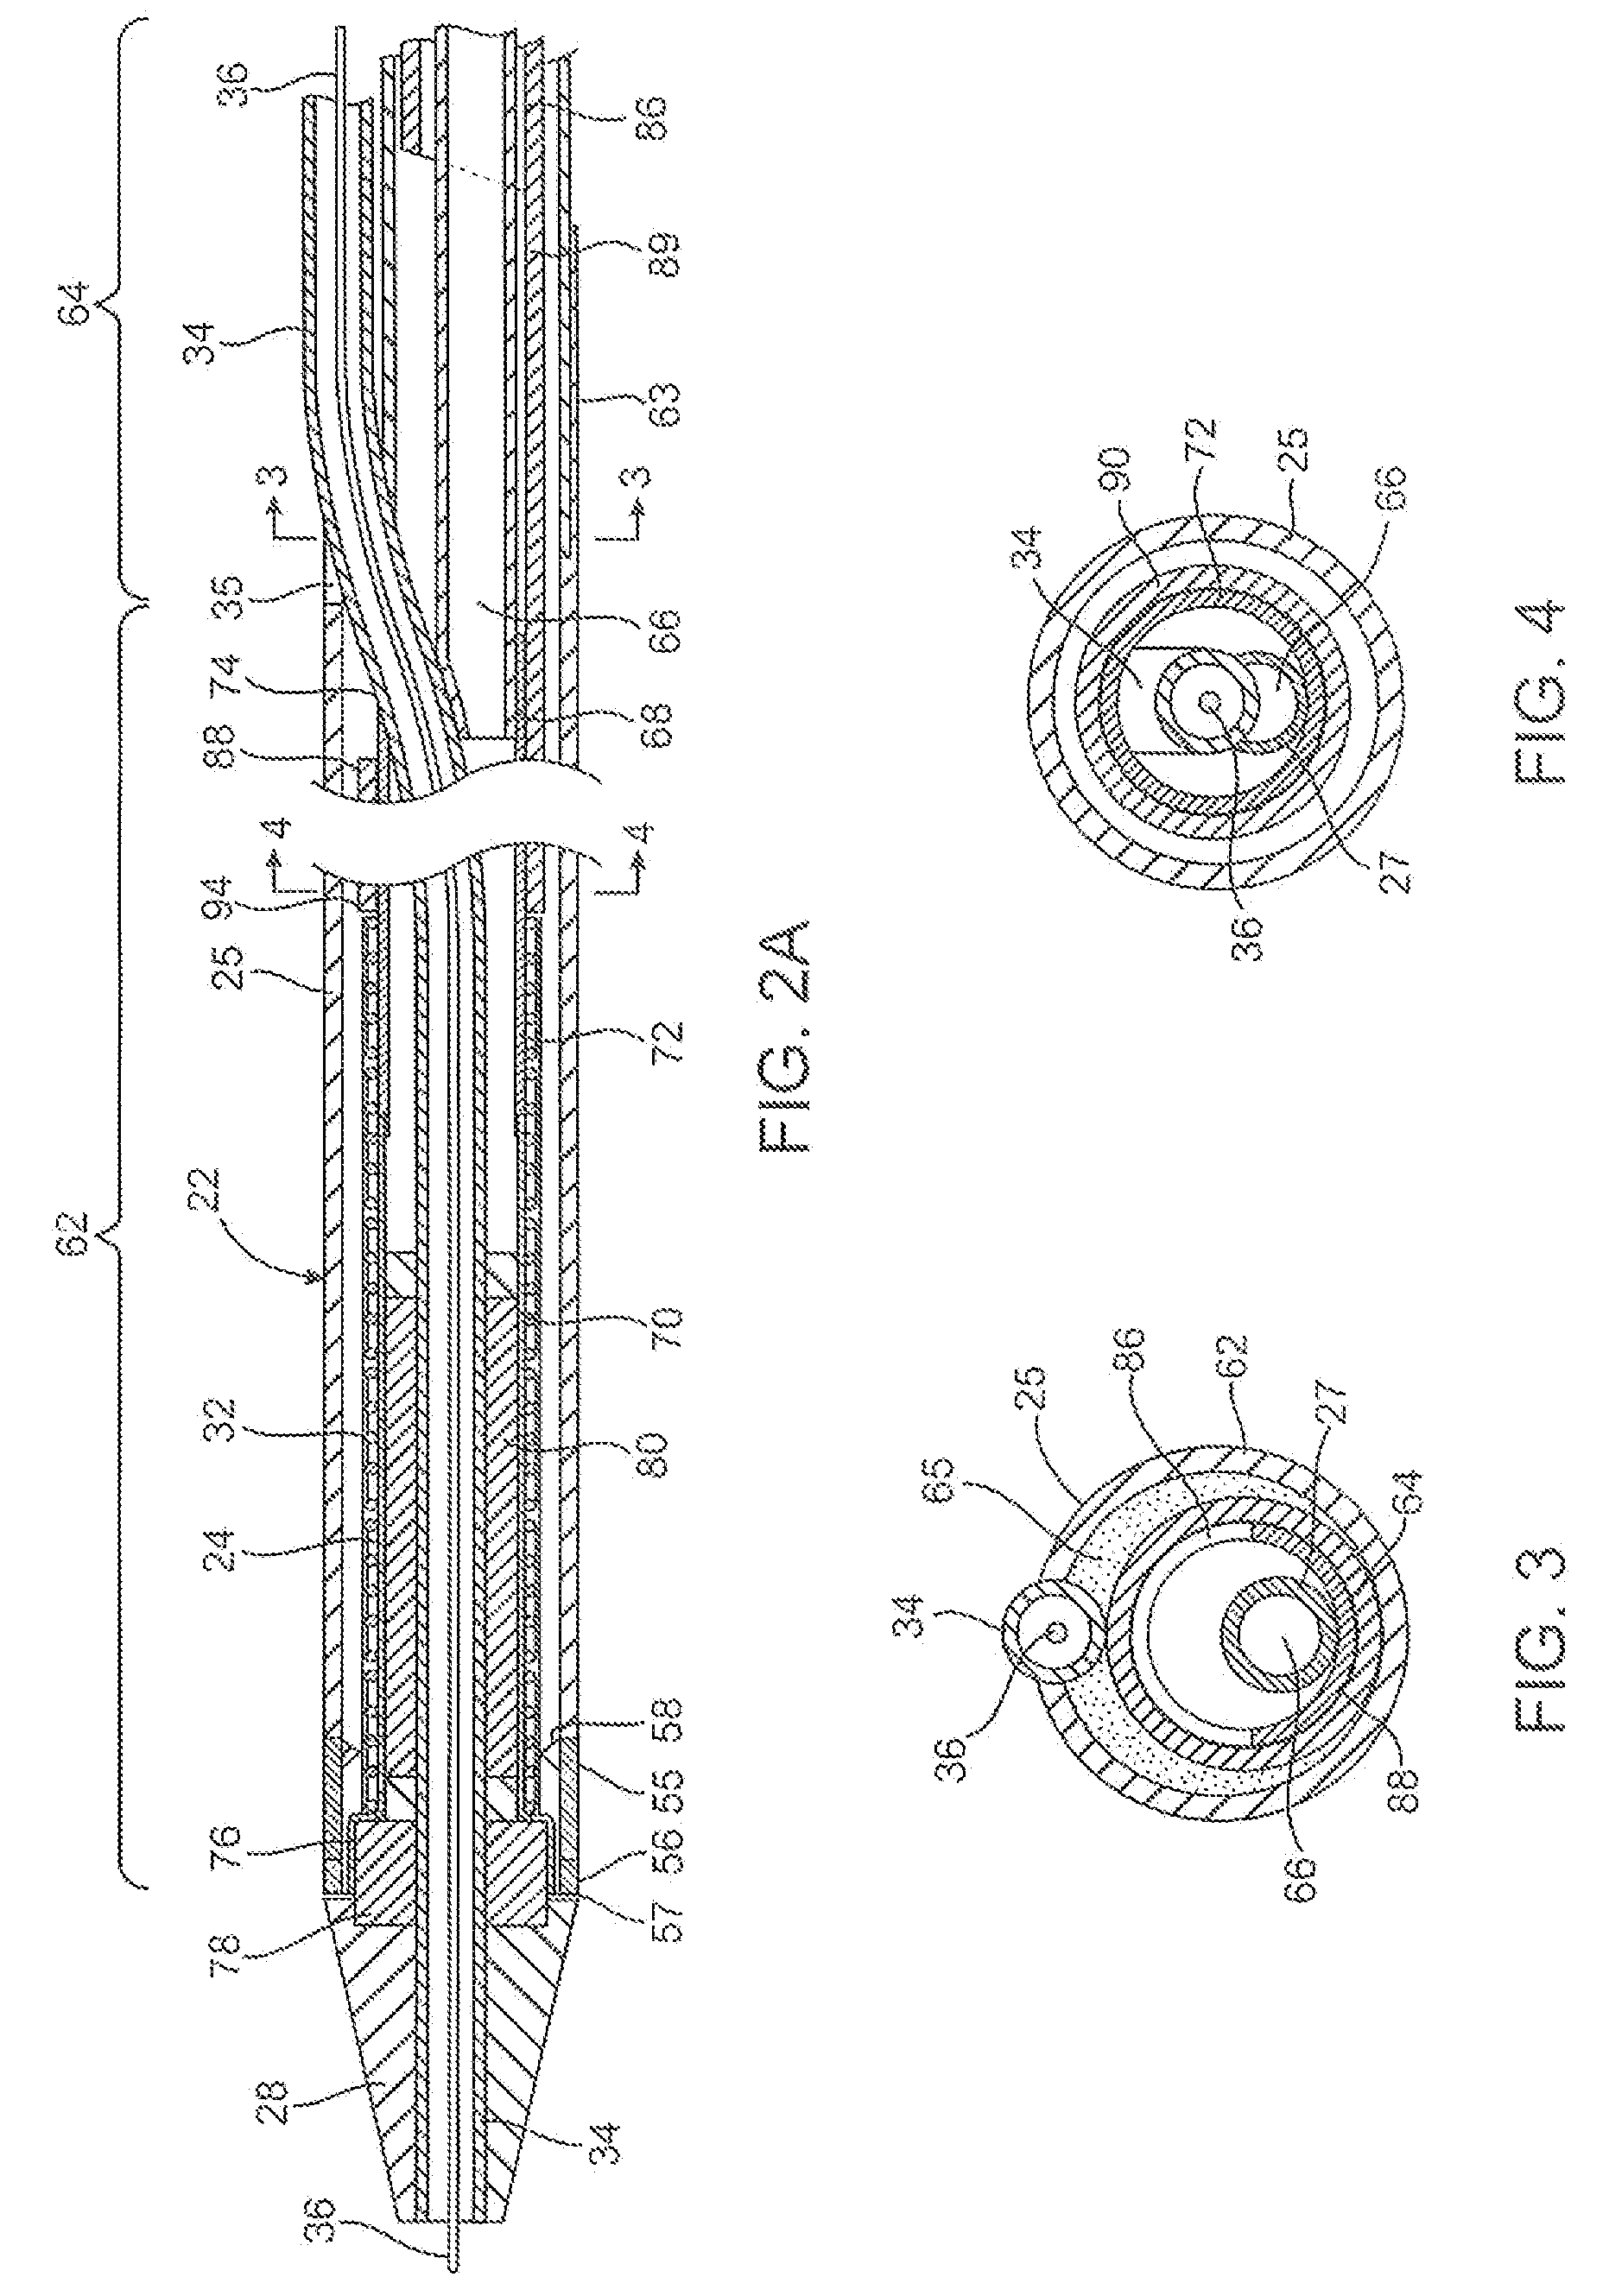 Devices and methods for controlling and counting interventional elements